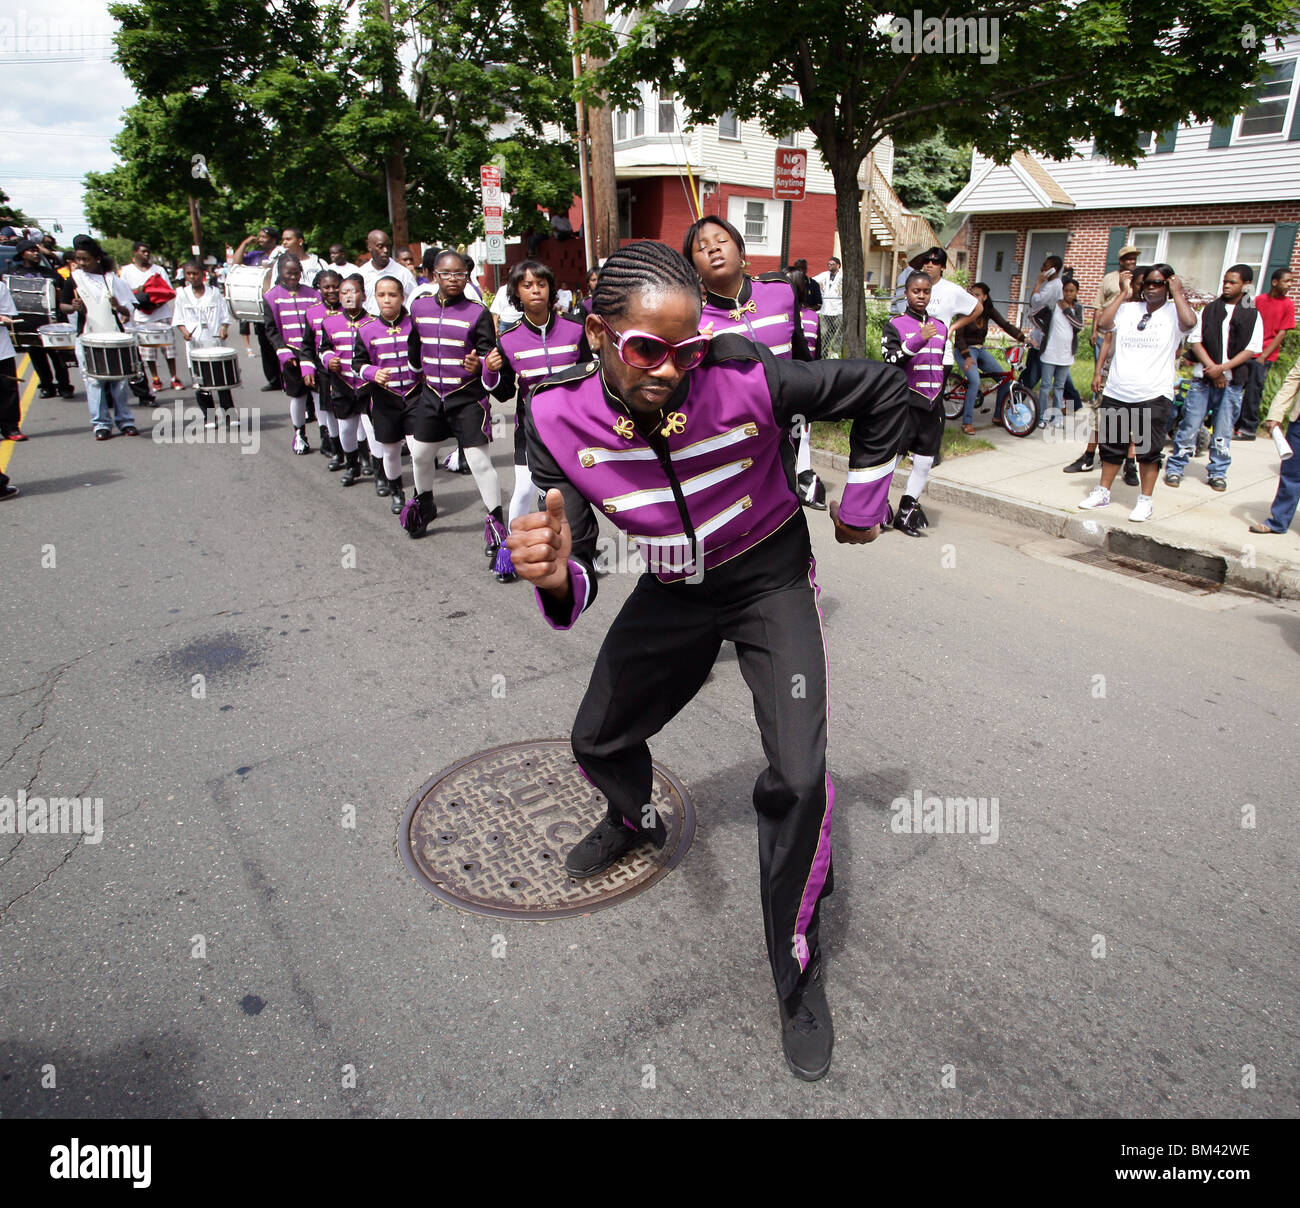 A drill team dances during the annual 'Freddie Fixer' parade in New Haven CT. The parade celebrates African American history Stock Photo